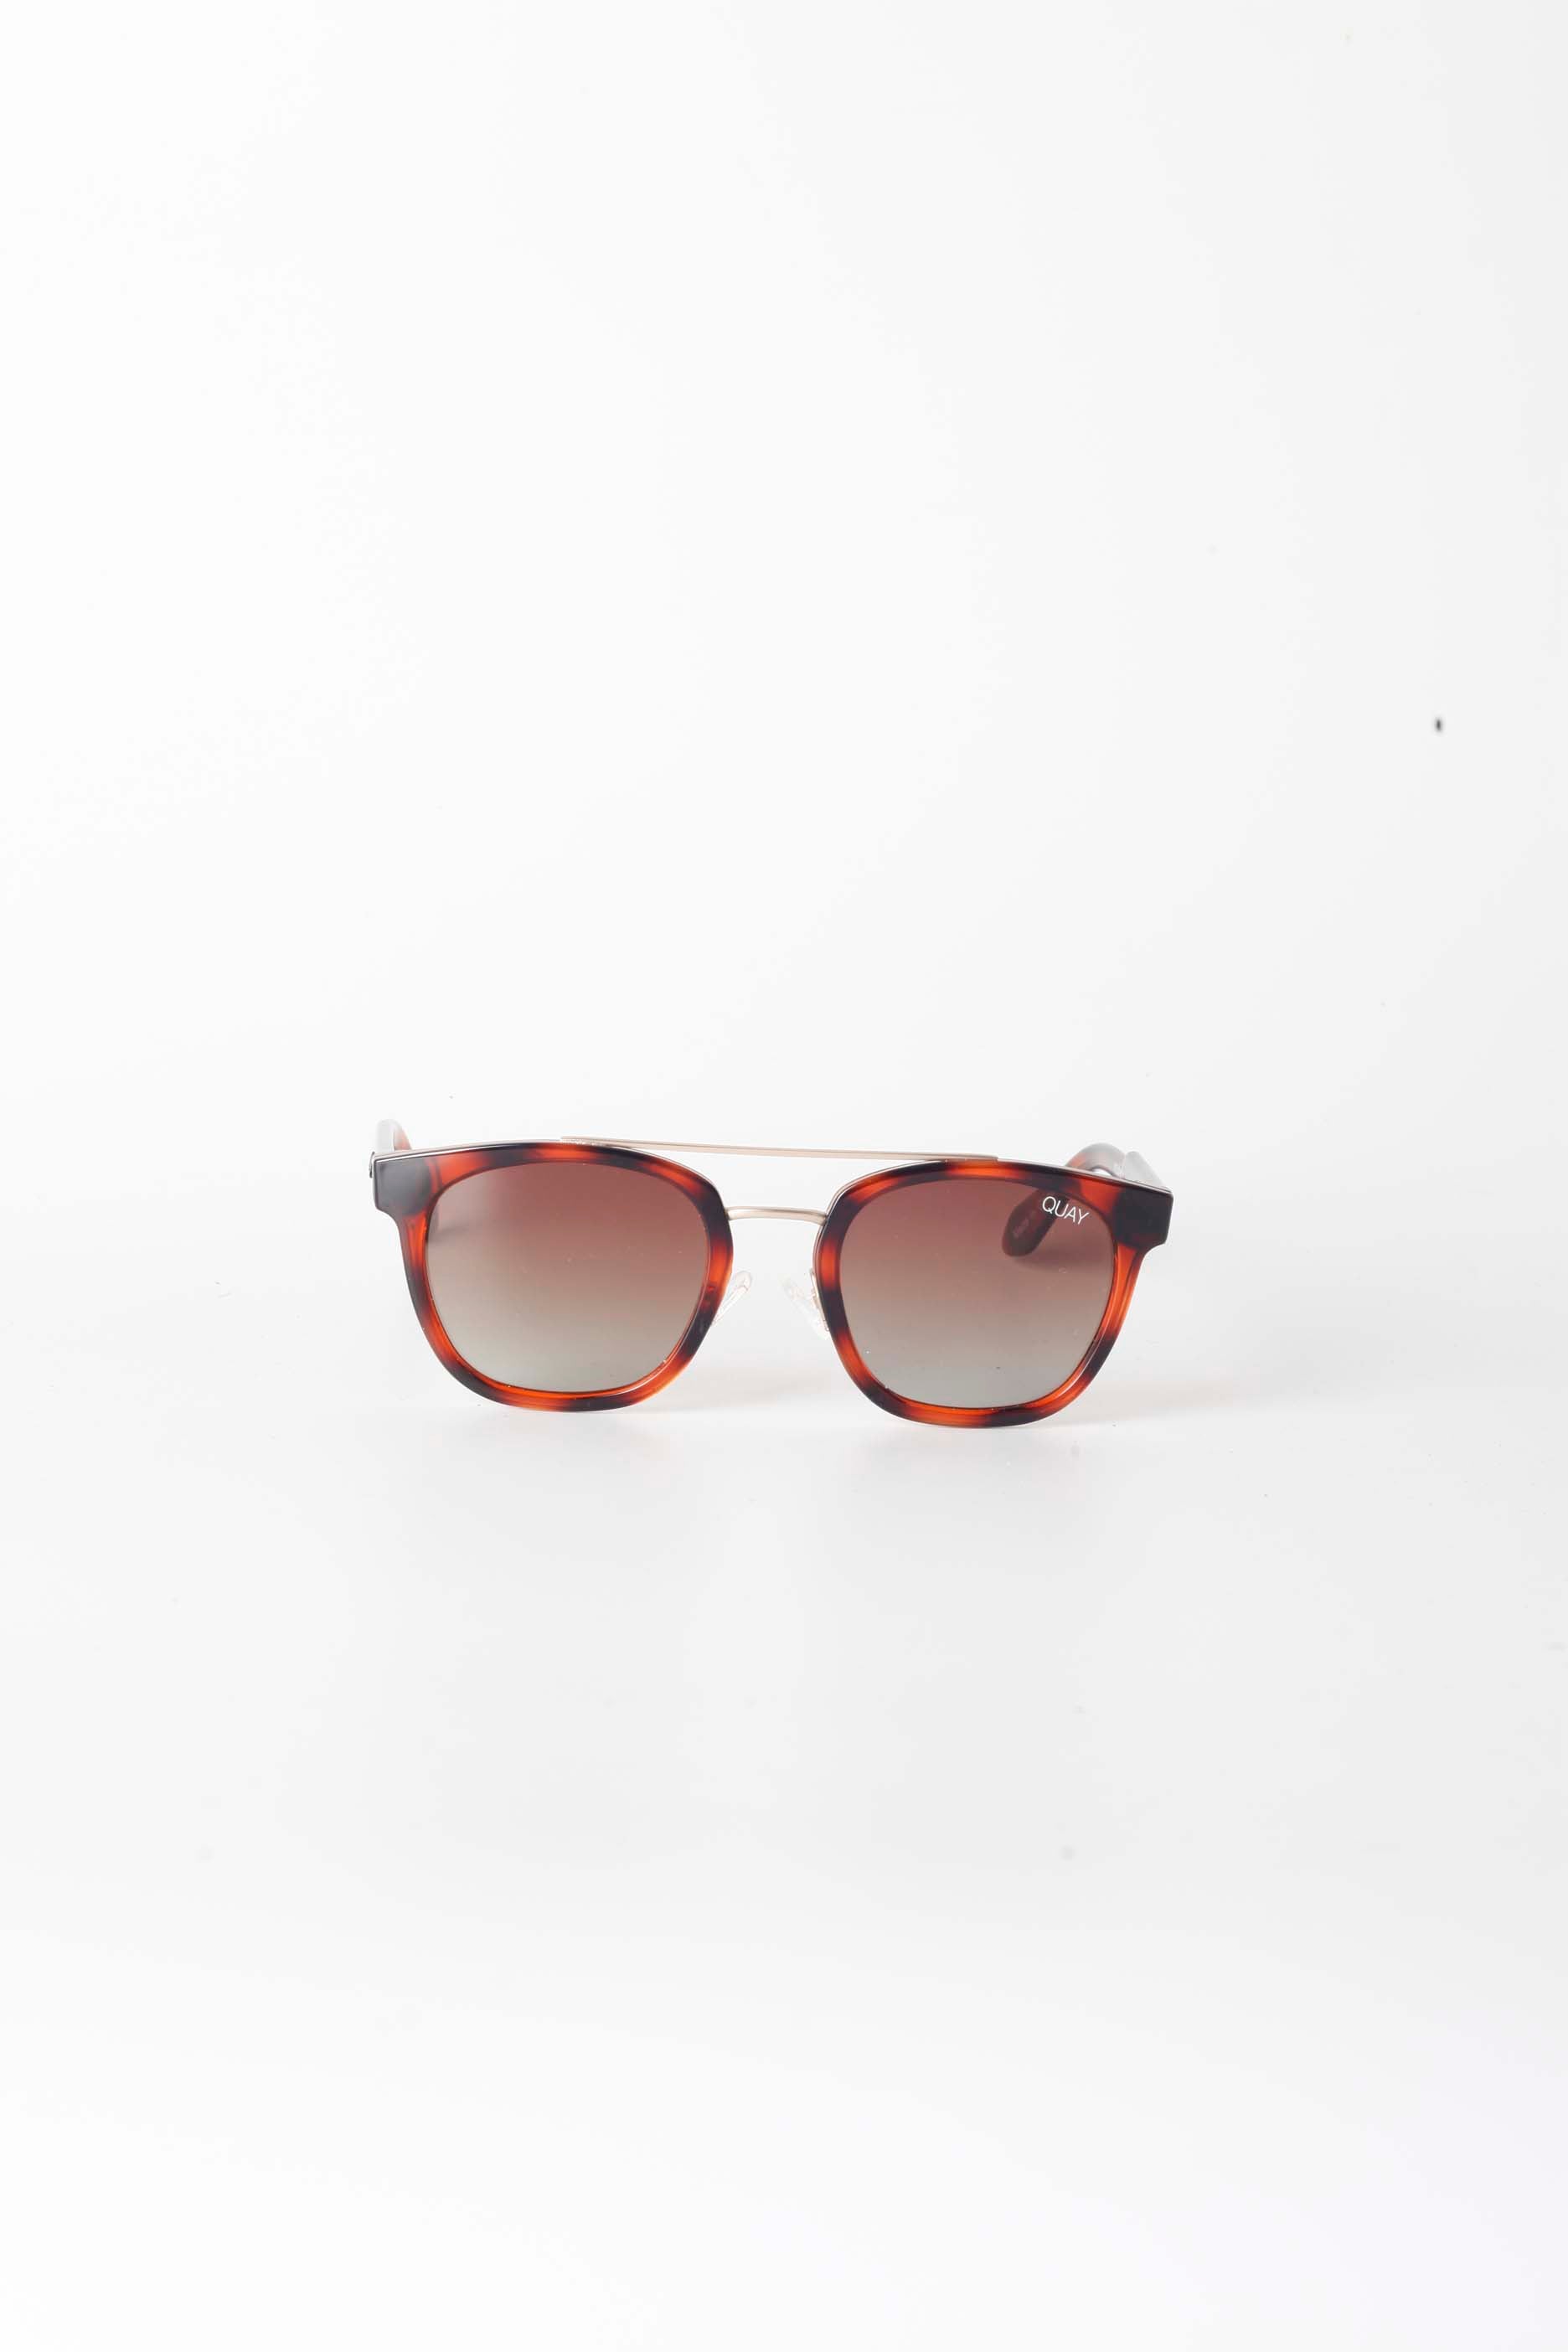 Brown Tint Sunglasses with Tortoise Shell